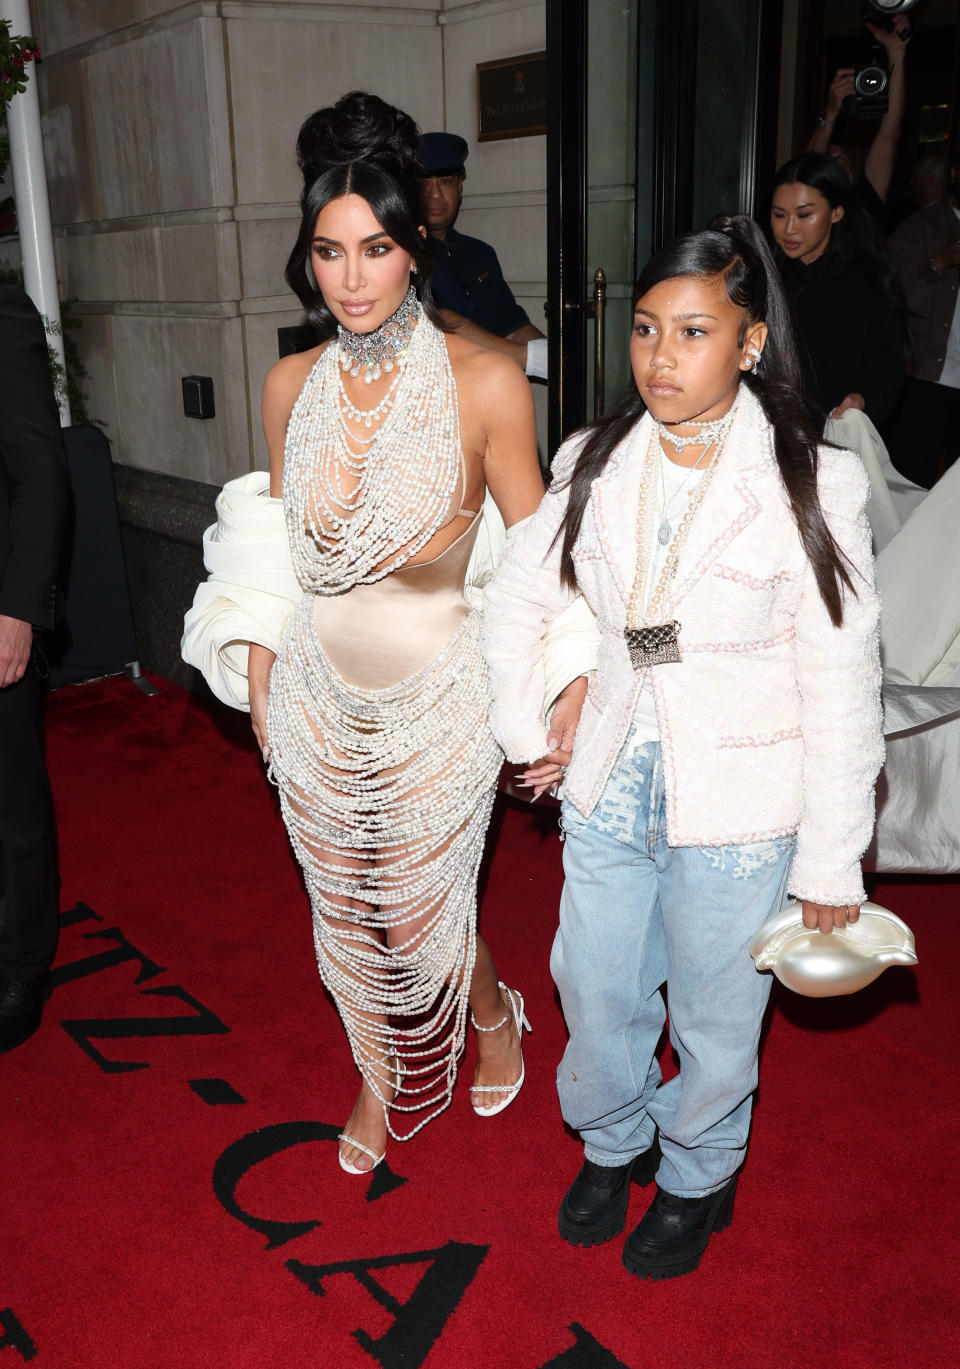 Kim Kardashian and North West are seen leaving the Ritz Hotel on May 1, 2023 in New York City.  / Credit: MEGA/GC Images